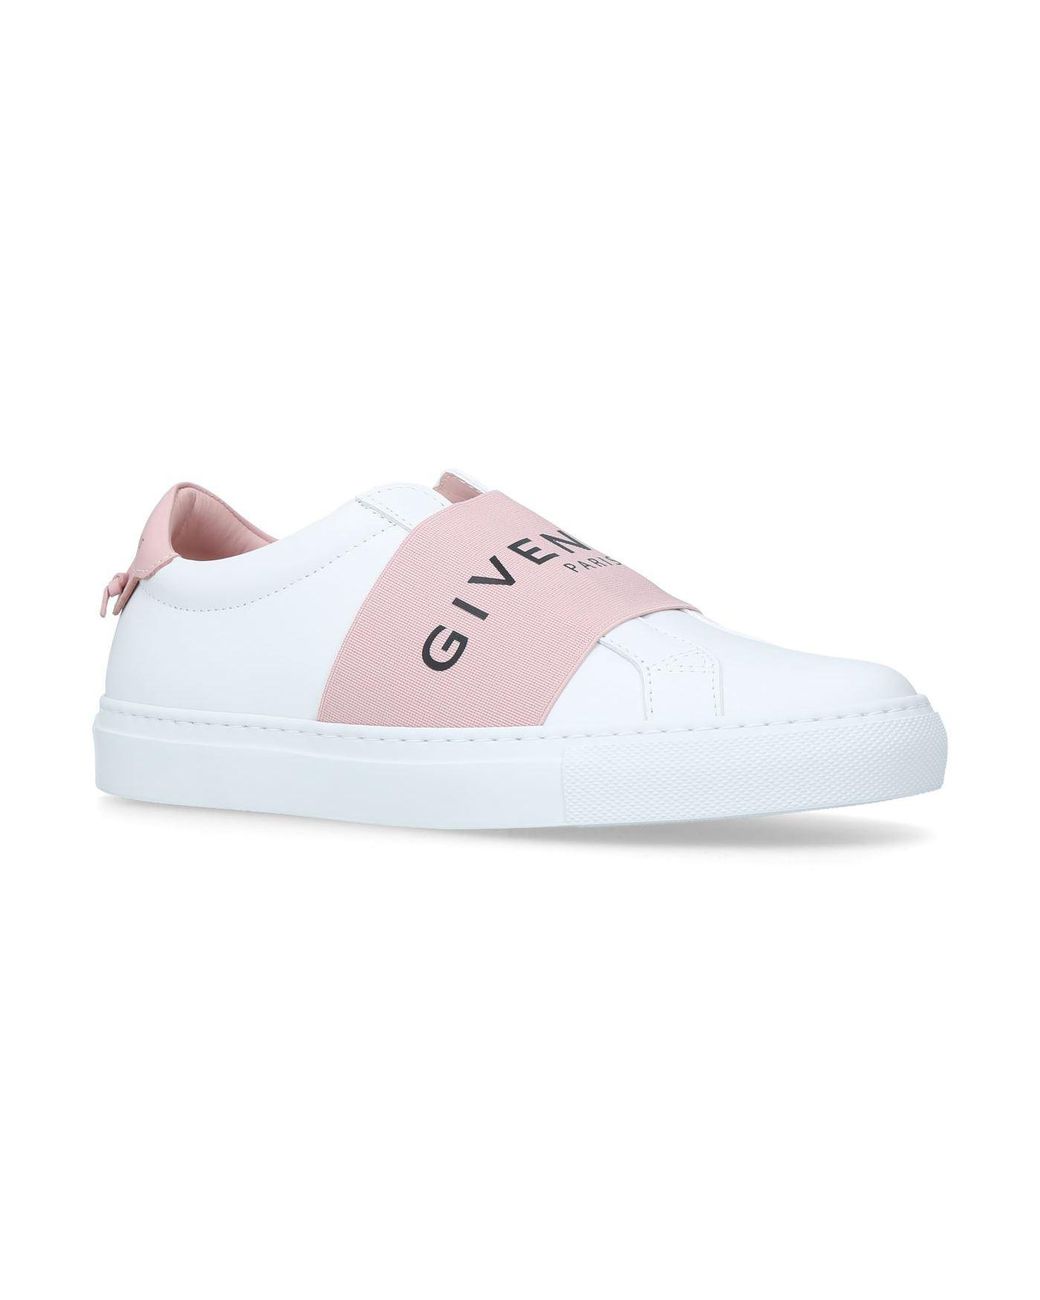 Givenchy Logo Strap Sneakers in Pink | Lyst